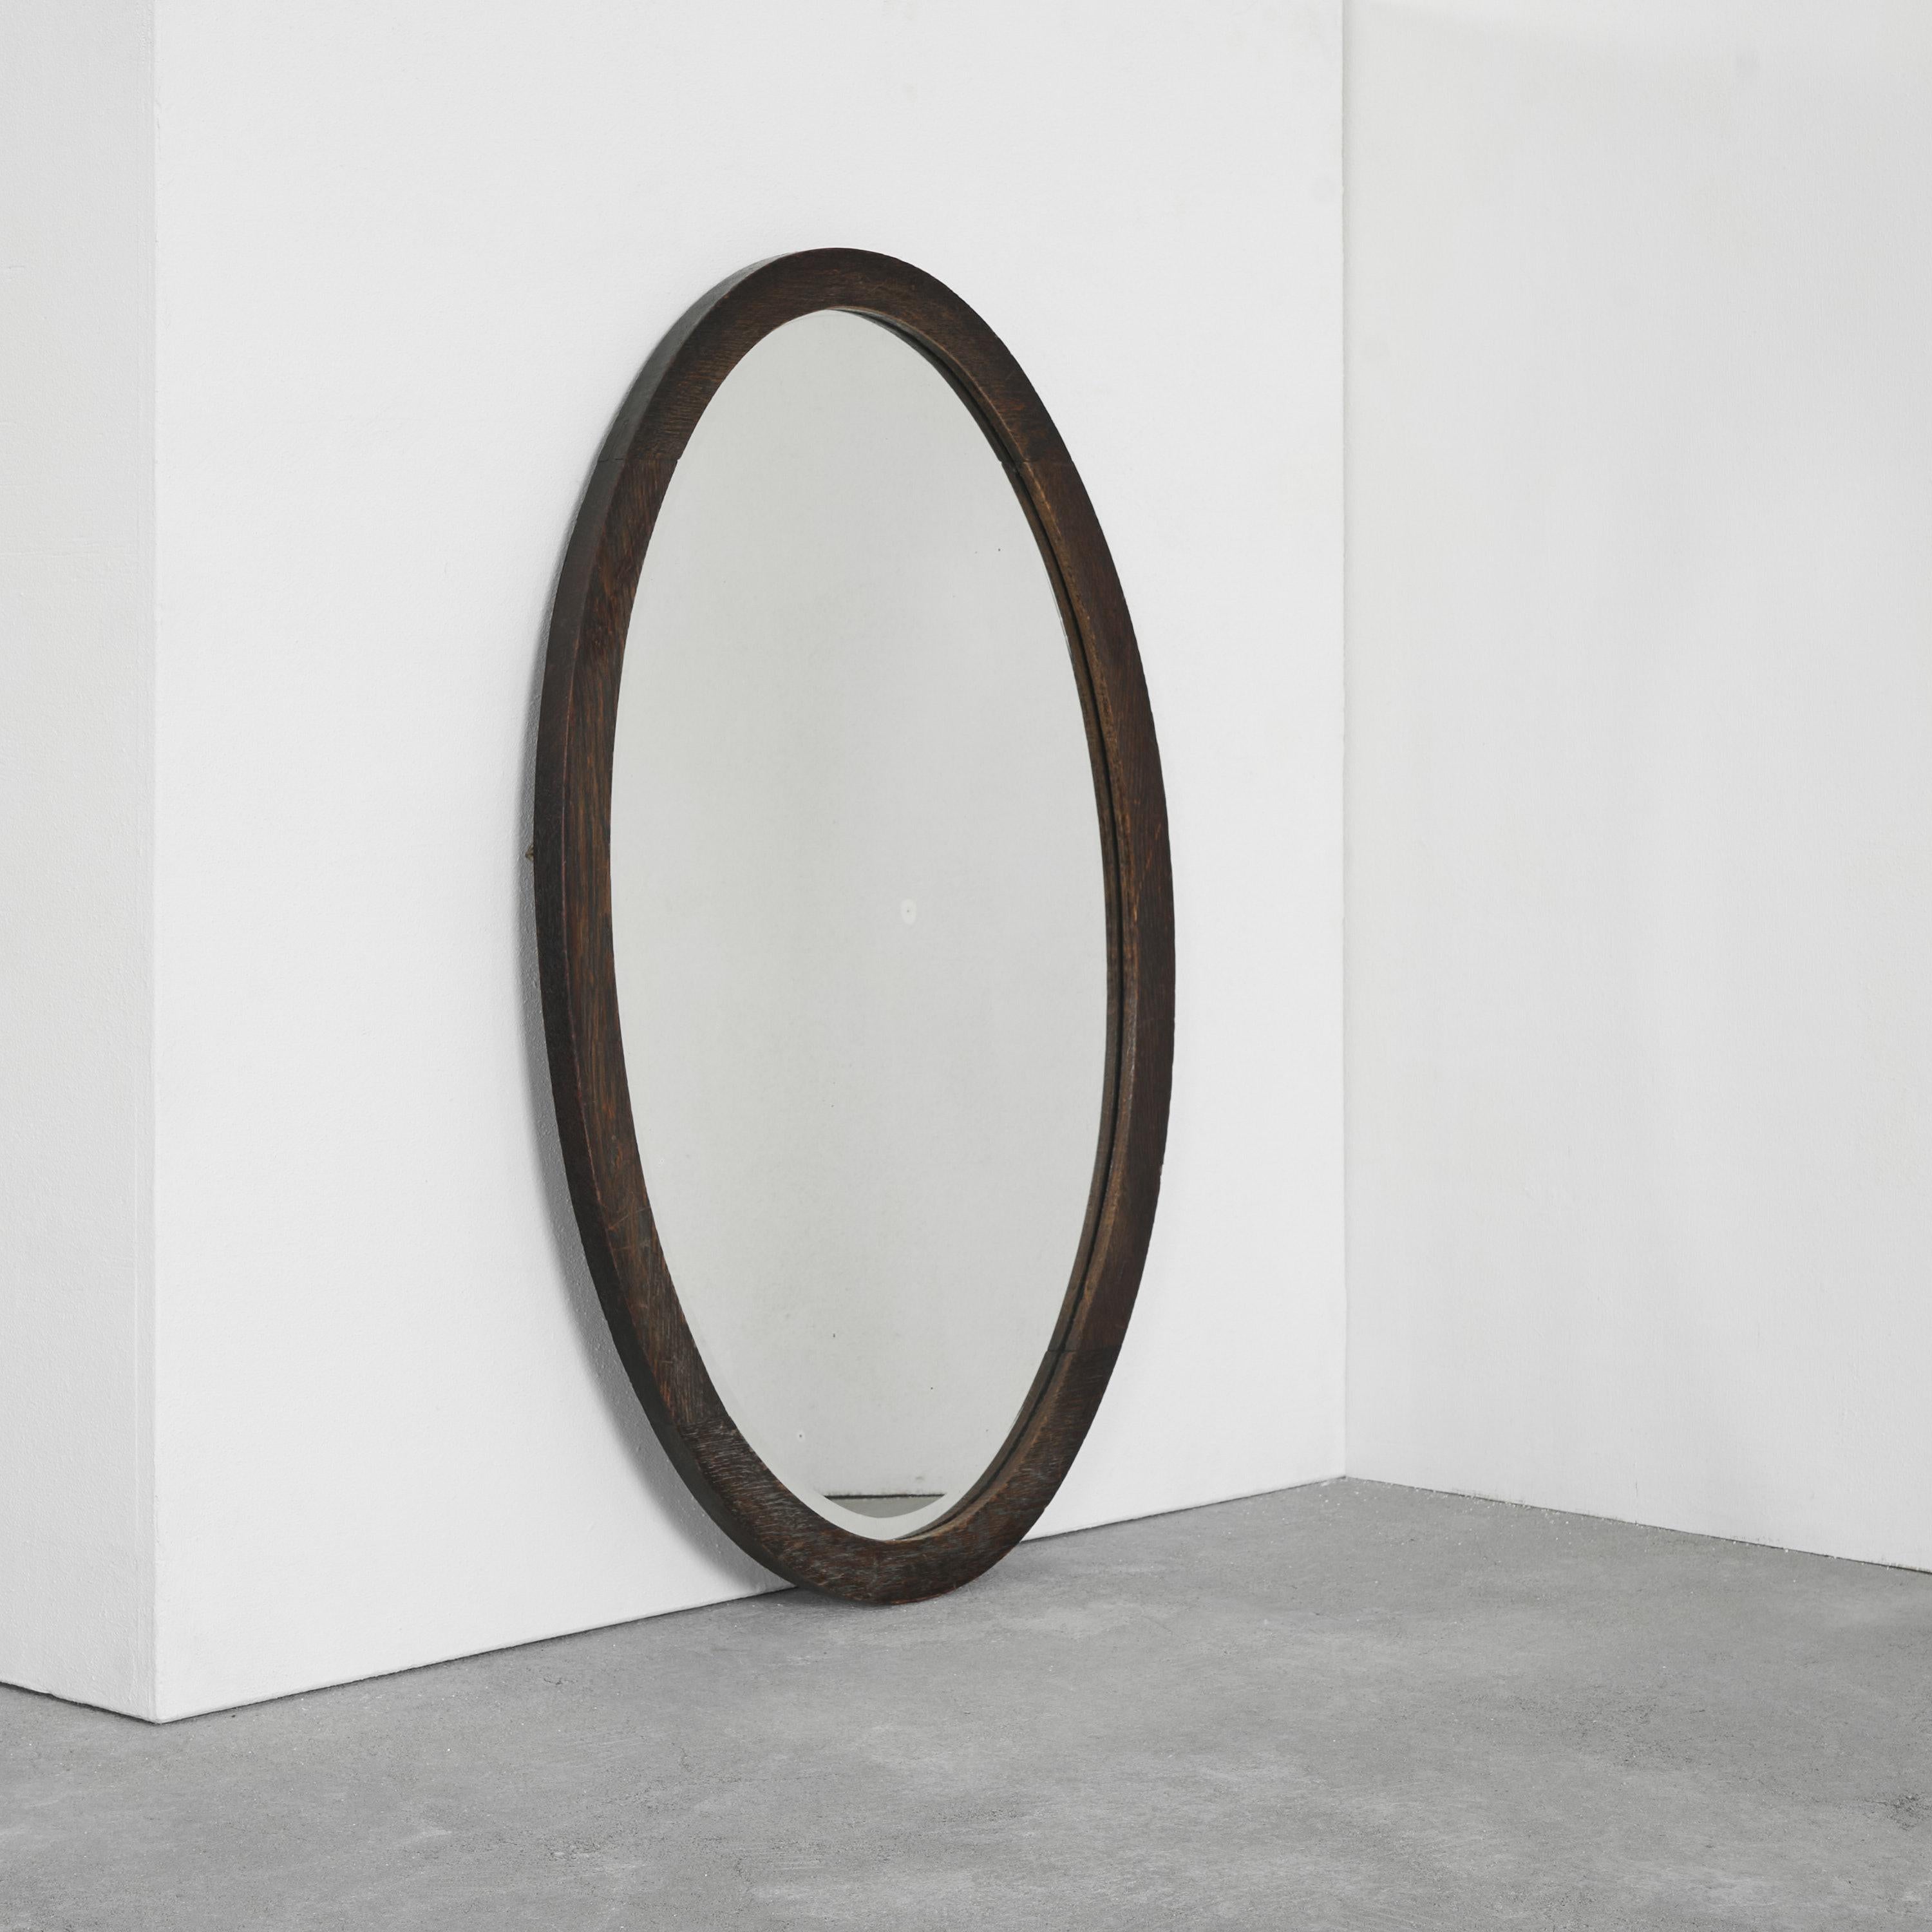 Oval Mirror in Solid Oak. Europe, 1930s.

Wonderful and honest 1930s mirror in solid oak with an elegant oval shape. Due to the size and proportions, this mirror is a great piece in any stylish interior were originality and honest materials are